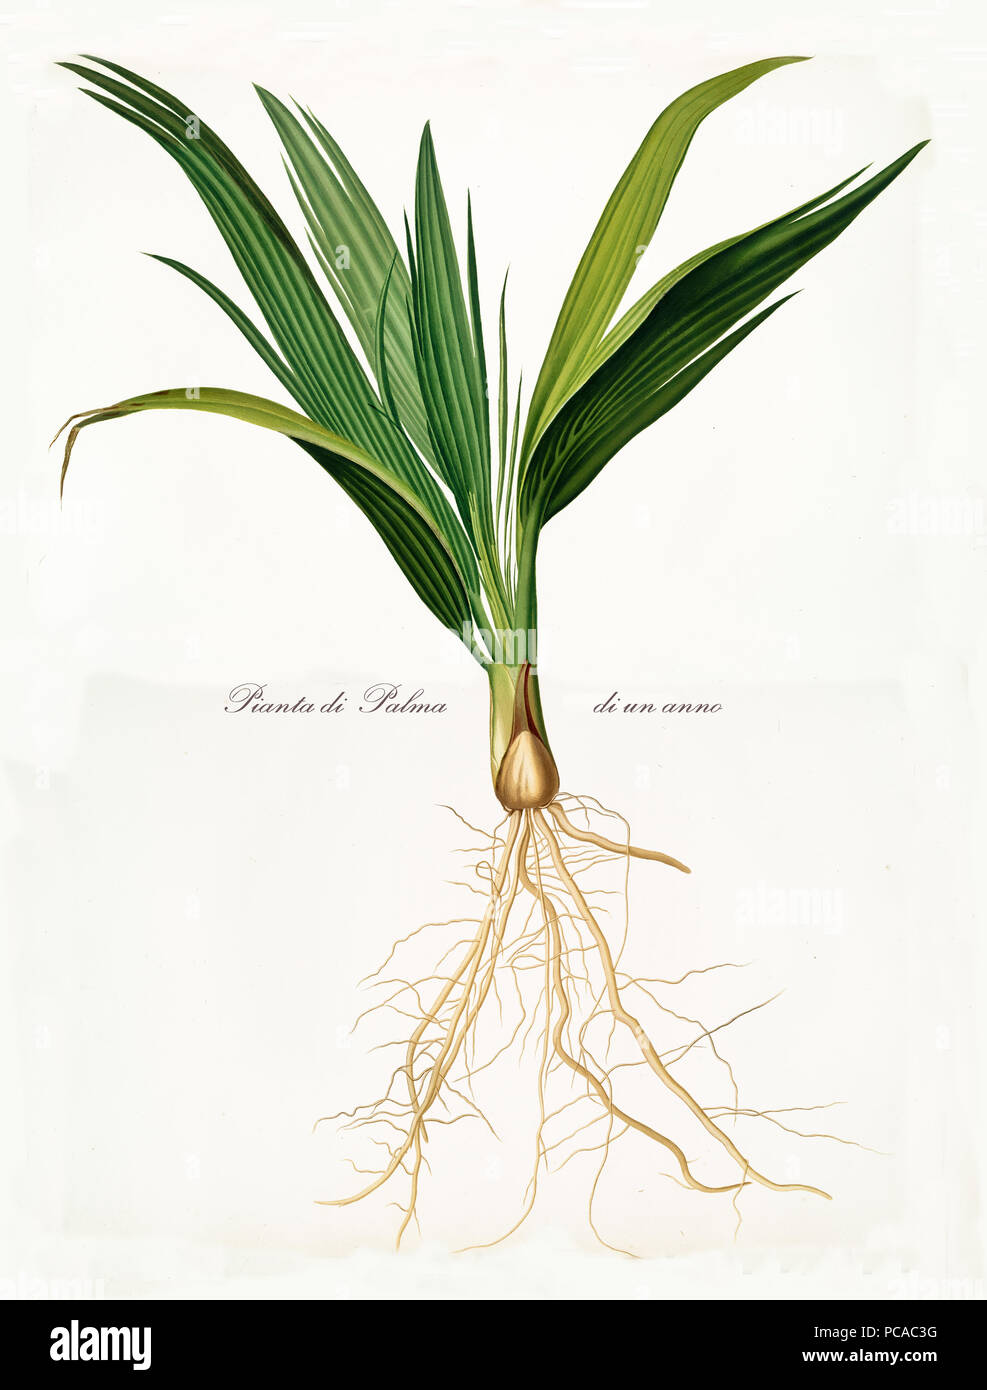 Date palm seedling, seed and roots isolated on white background. Old botanical illustration realized in a detailed watercolor style by Giorgio Gallesio on 1817, 1839 Pisa Italy Stock Photo